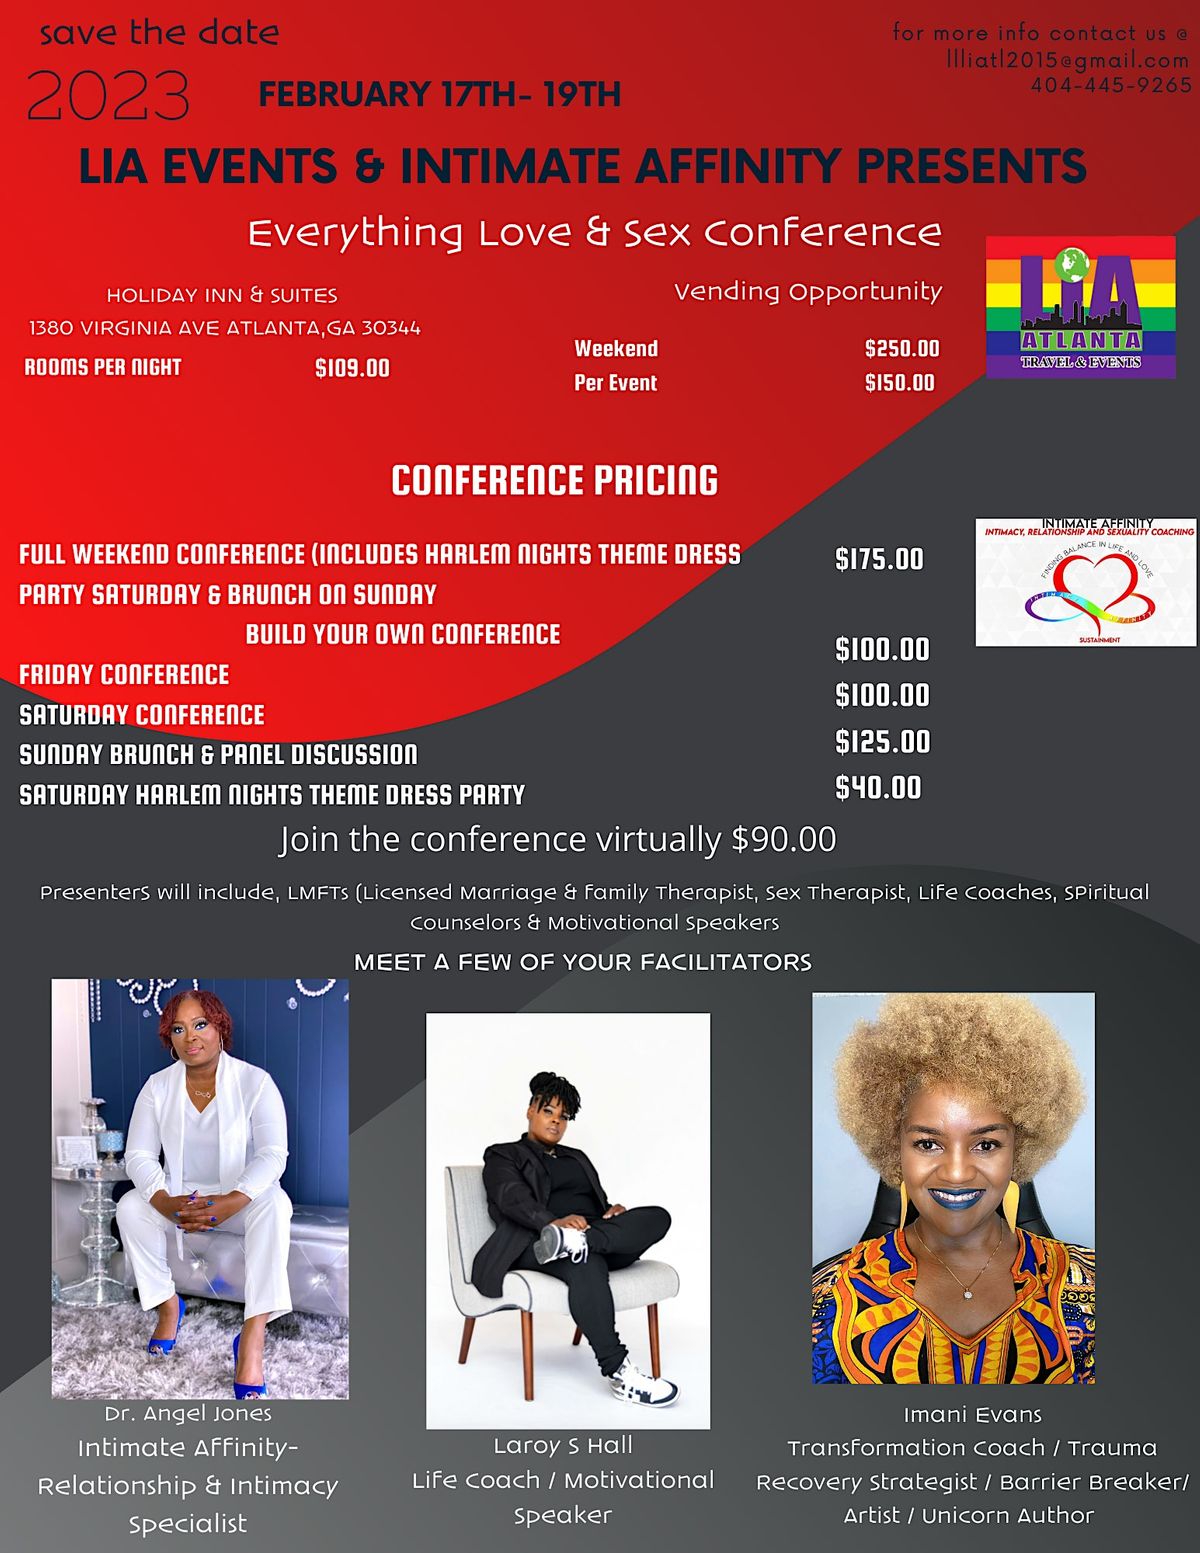 LIA EVENTS & INTIMATE AFFINITY PRESENTS "EVERYTHING LOVE & SEX CONFERENCE"